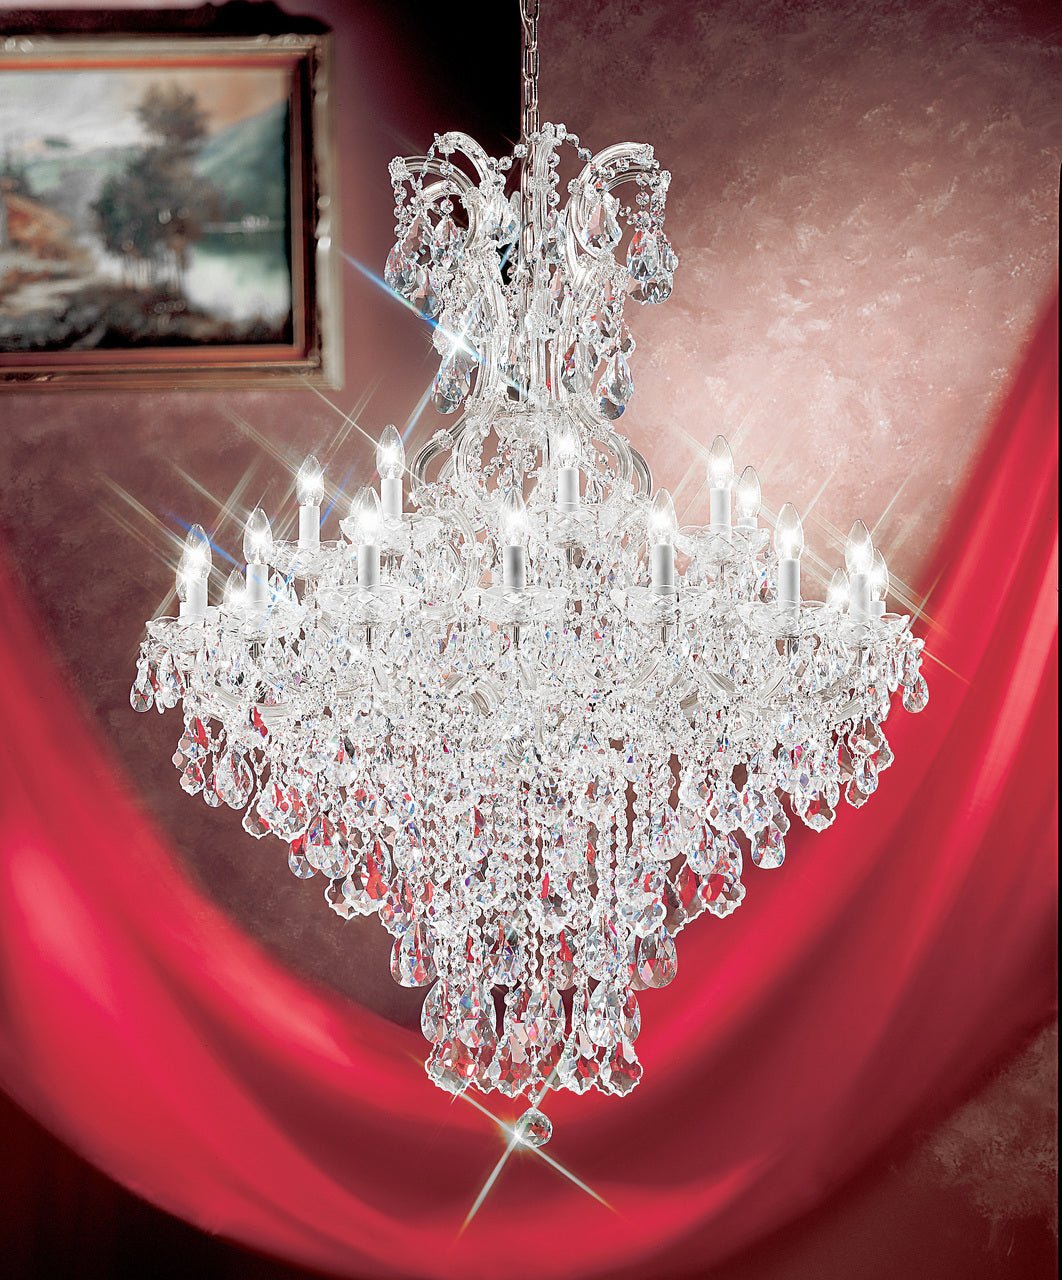 Classic Lighting 8179 CH SC Maria Theresa Traditional Crystal Chandelier in Chrome (Imported from Italy)